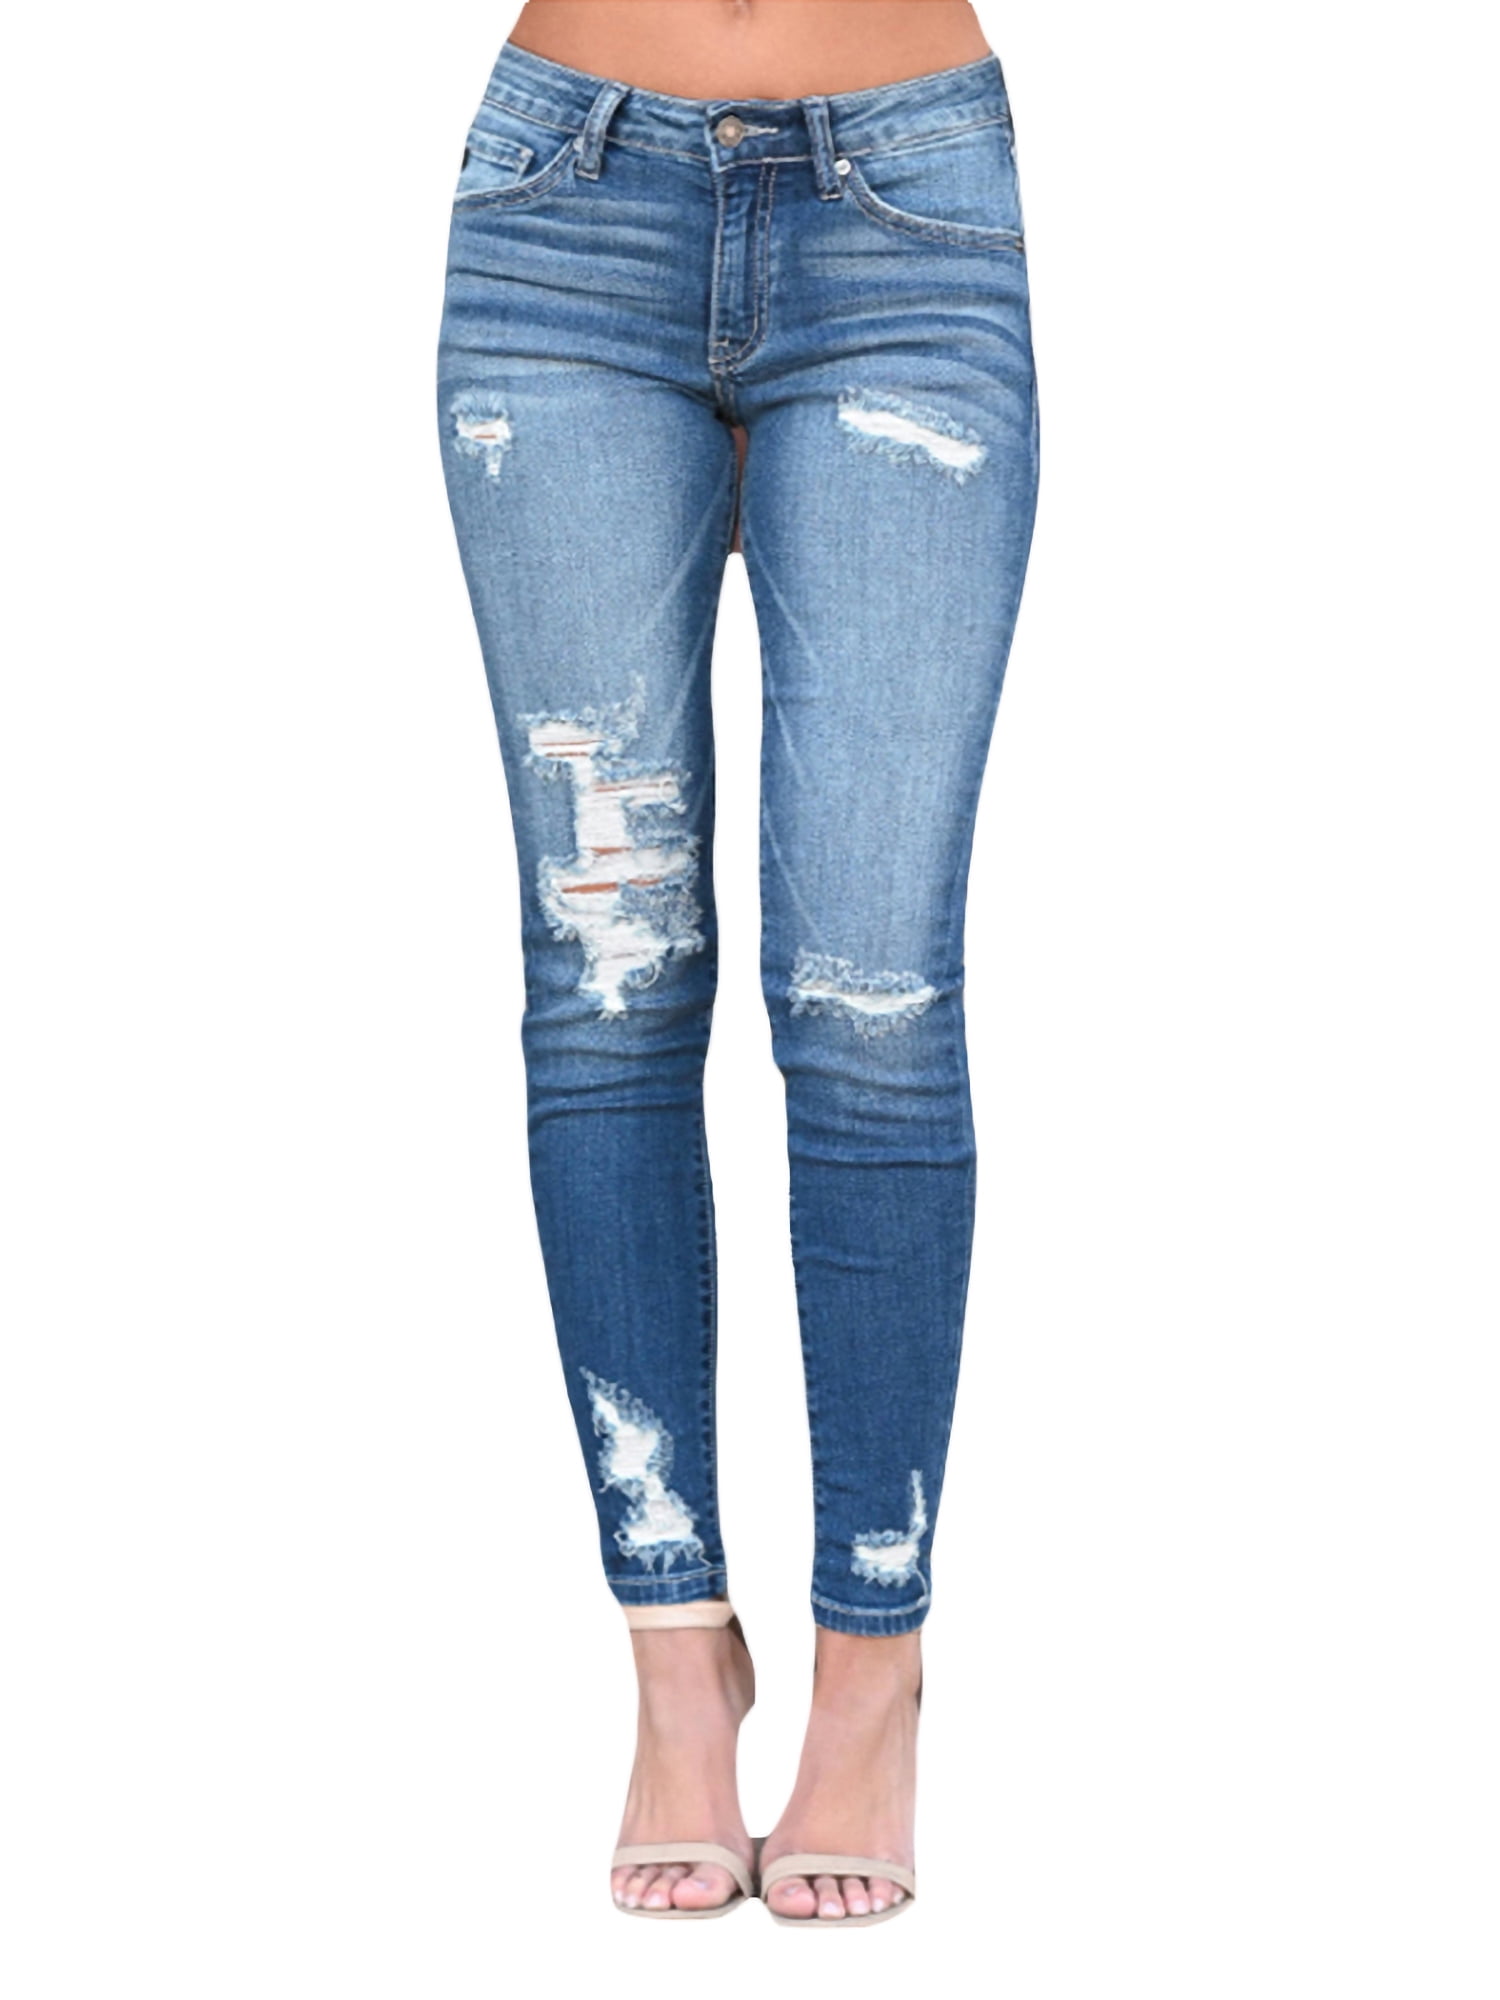 Womens Ripped Destroyed Jeans Denim Pants Skinny High Waist Distressed Trousers 